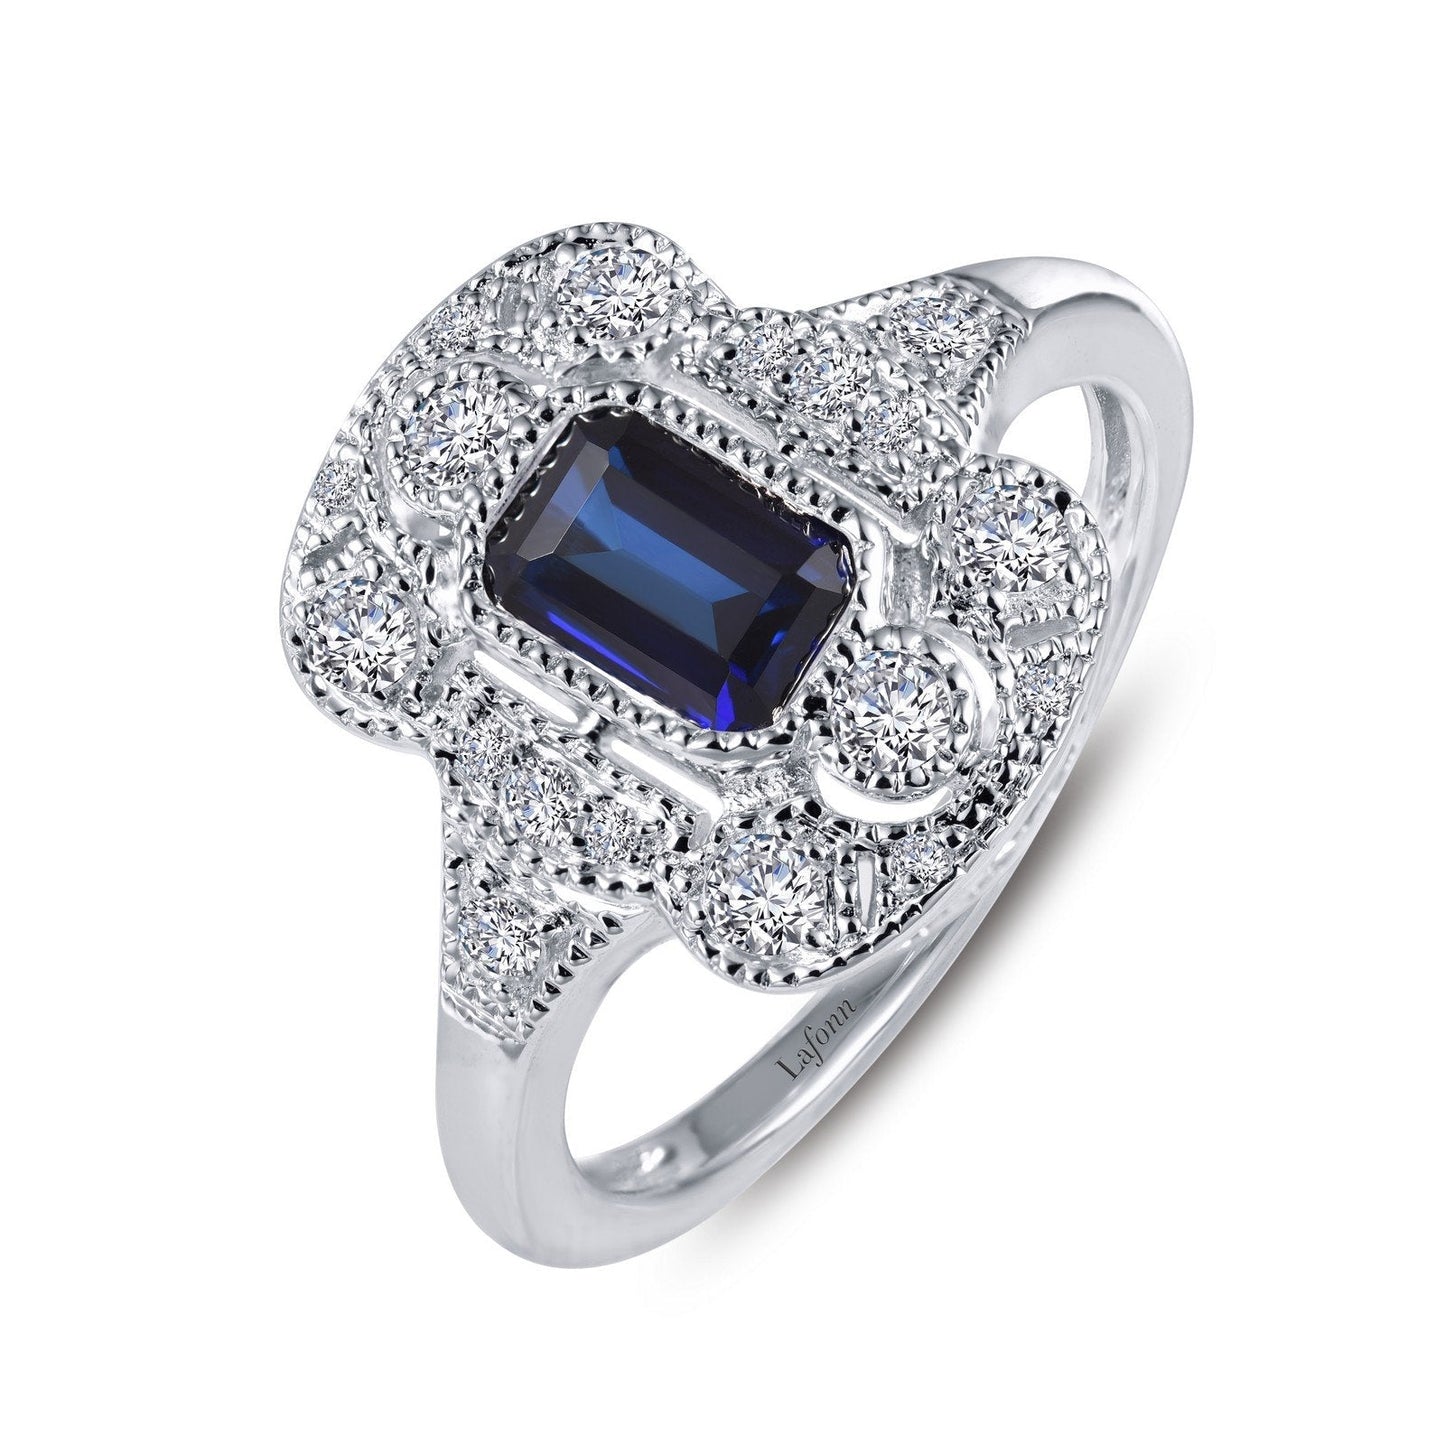 Load image into Gallery viewer, Lafonn Vintage Inspired Engagement Ring Sapphire RINGS Size 6 Platinum 0.99 CTS Width approx. 14mm
